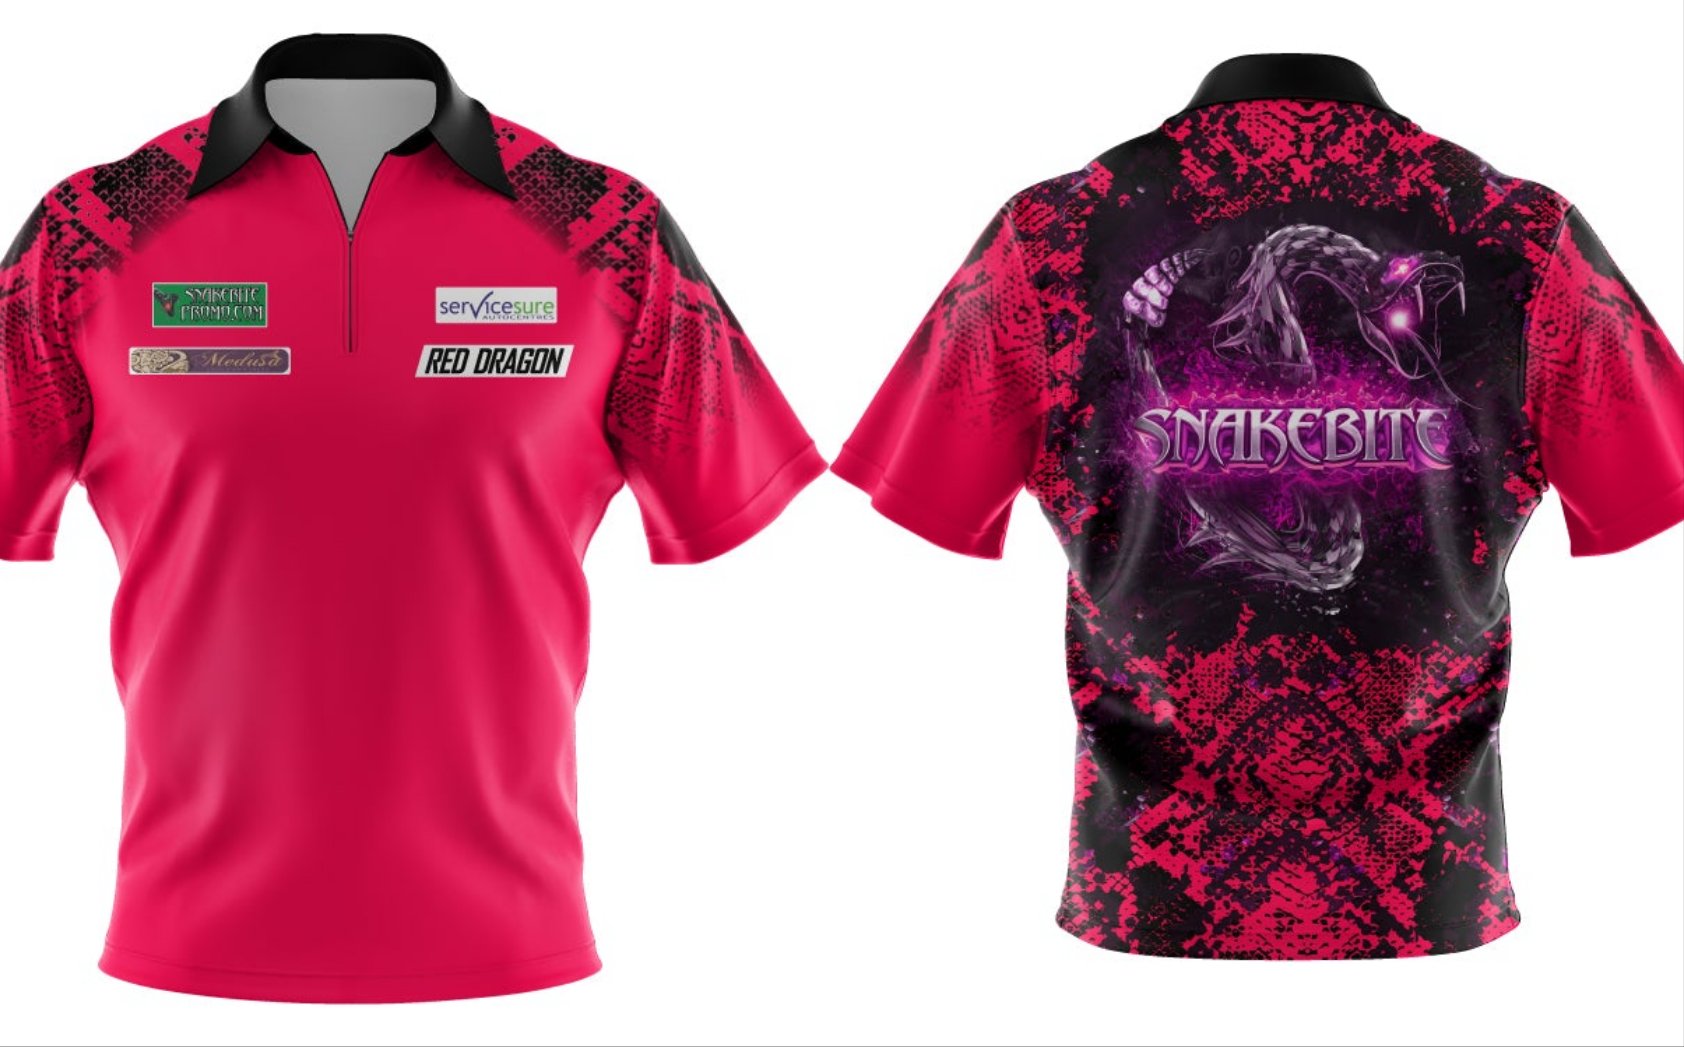 All shirts come Framed Limited edition snakebite playing shirts, was made for the 2022 season but due to change in sponsor with winning the World Championship 2022 we had to order new ones. A great opportunity to purchase a actual shirt made for Peter.